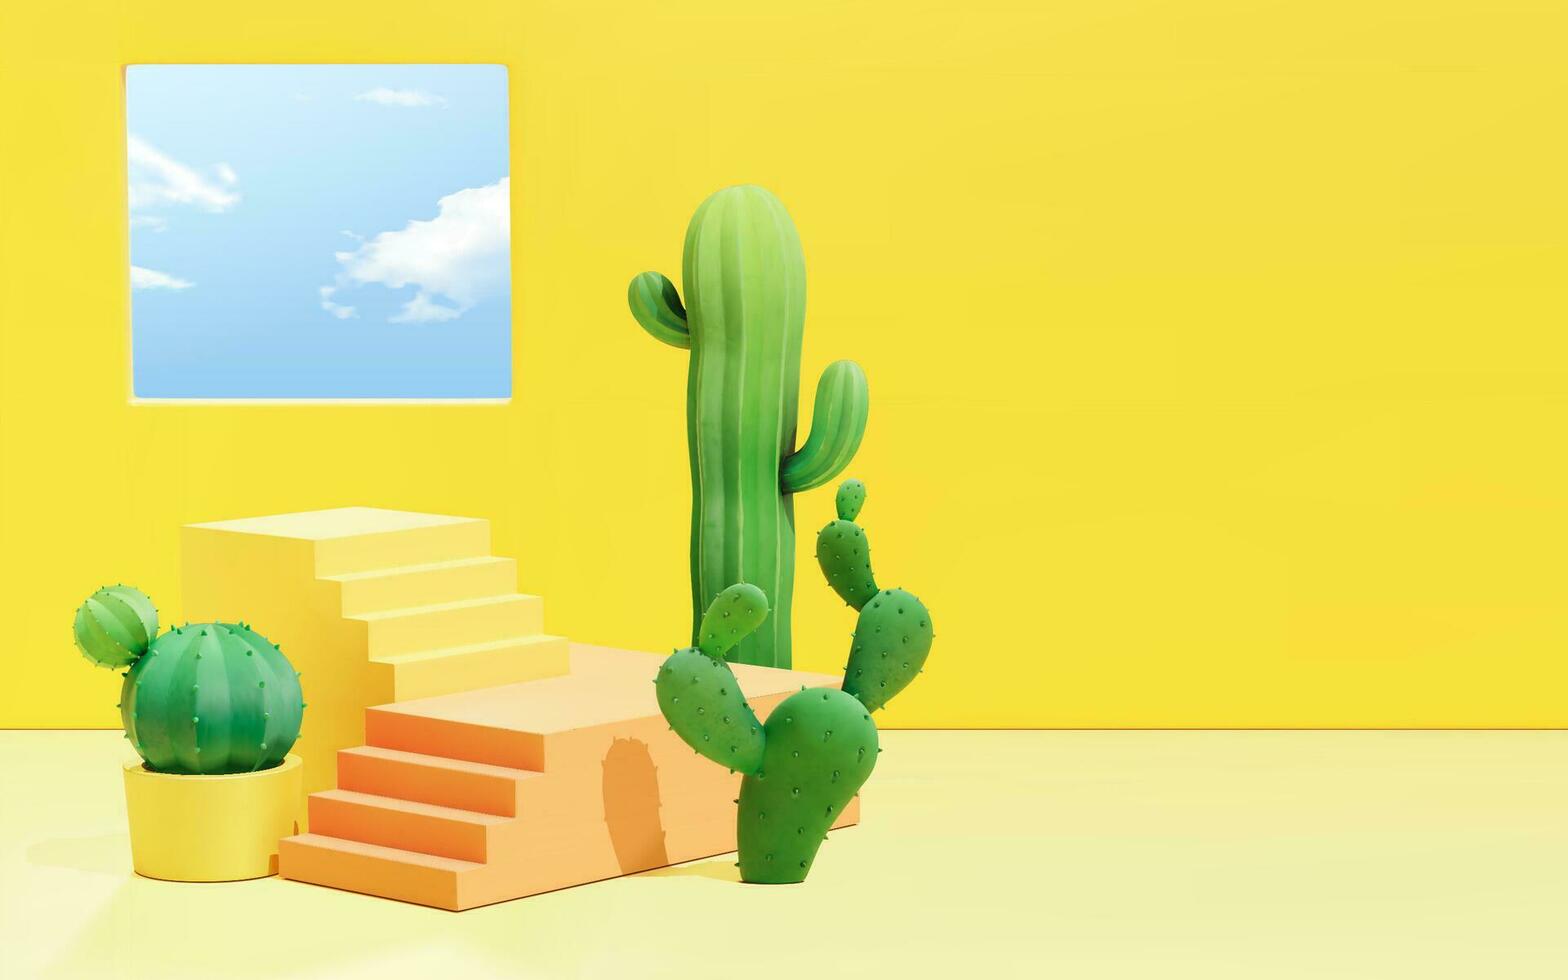 3d minimal yellow scene design with stair stage and cactus pots. Background suitable for summer product display. vector